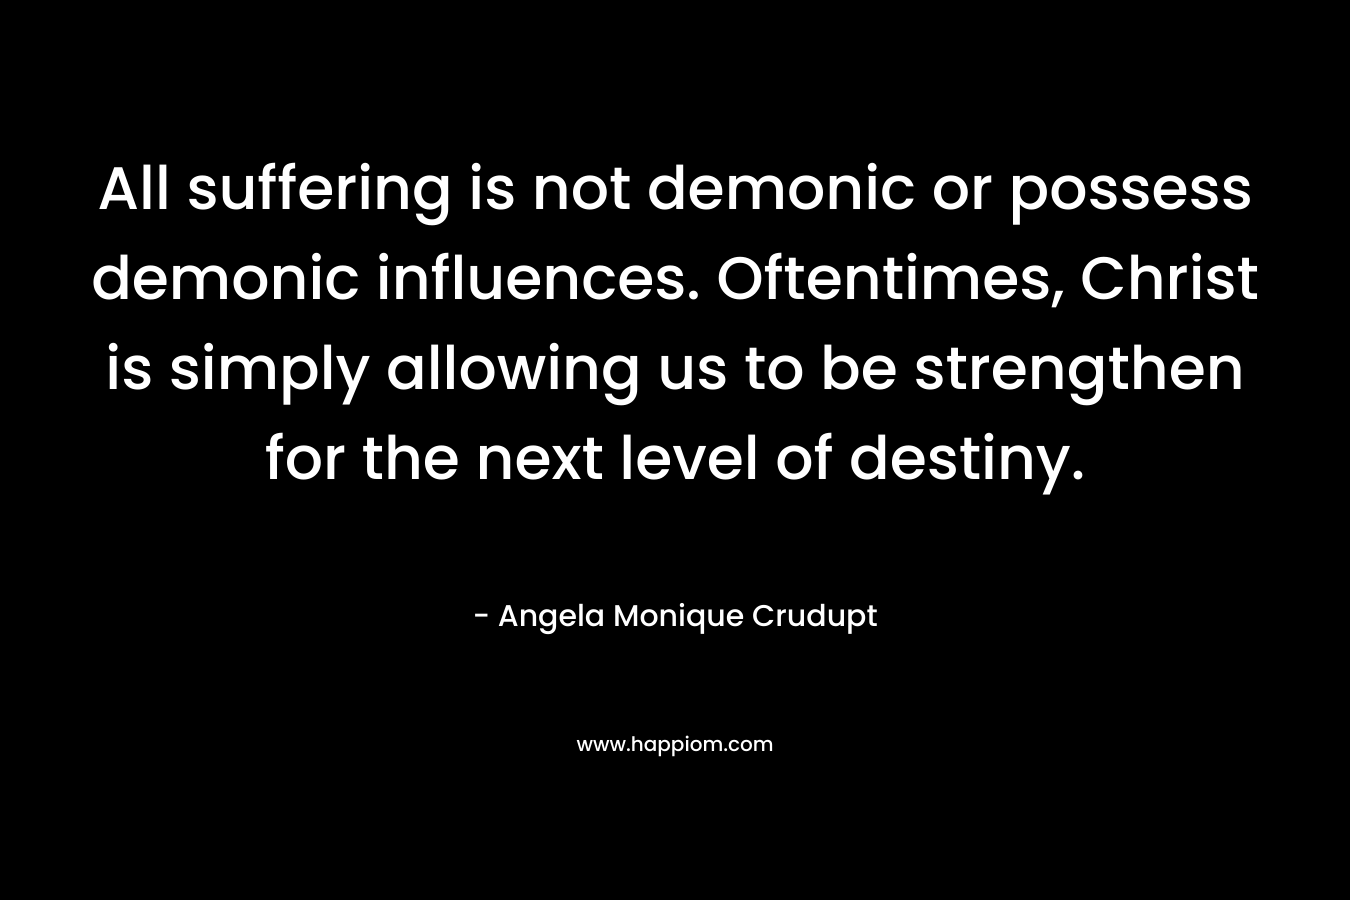 All suffering is not demonic or possess demonic influences. Oftentimes, Christ is simply allowing us to be strengthen for the next level of destiny. – Angela Monique Crudupt